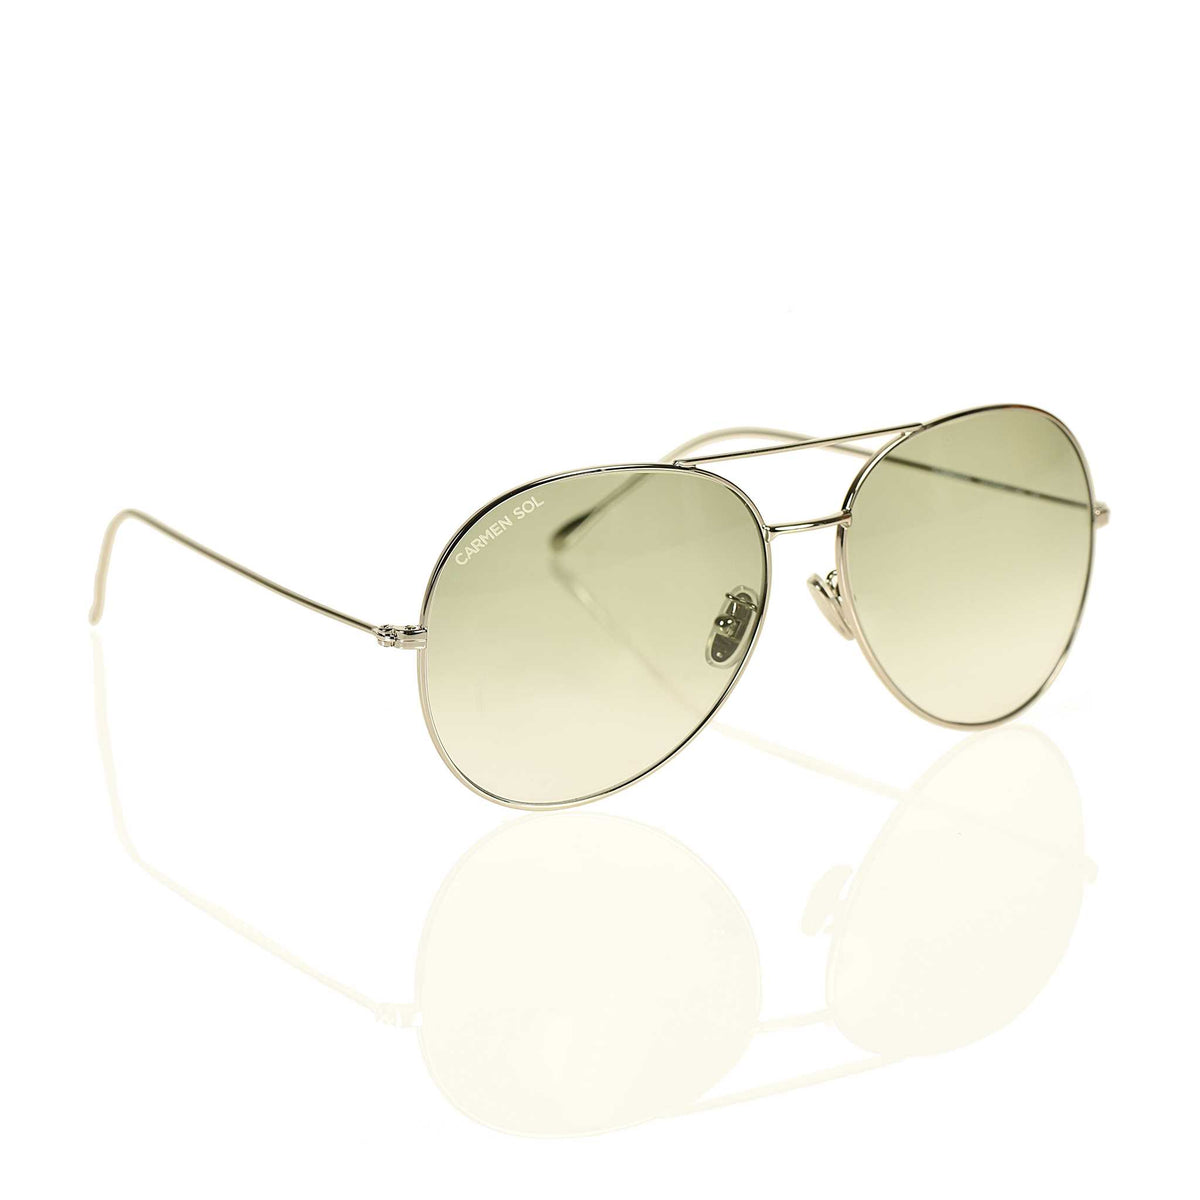 Sunglasses for women with olive green lenses